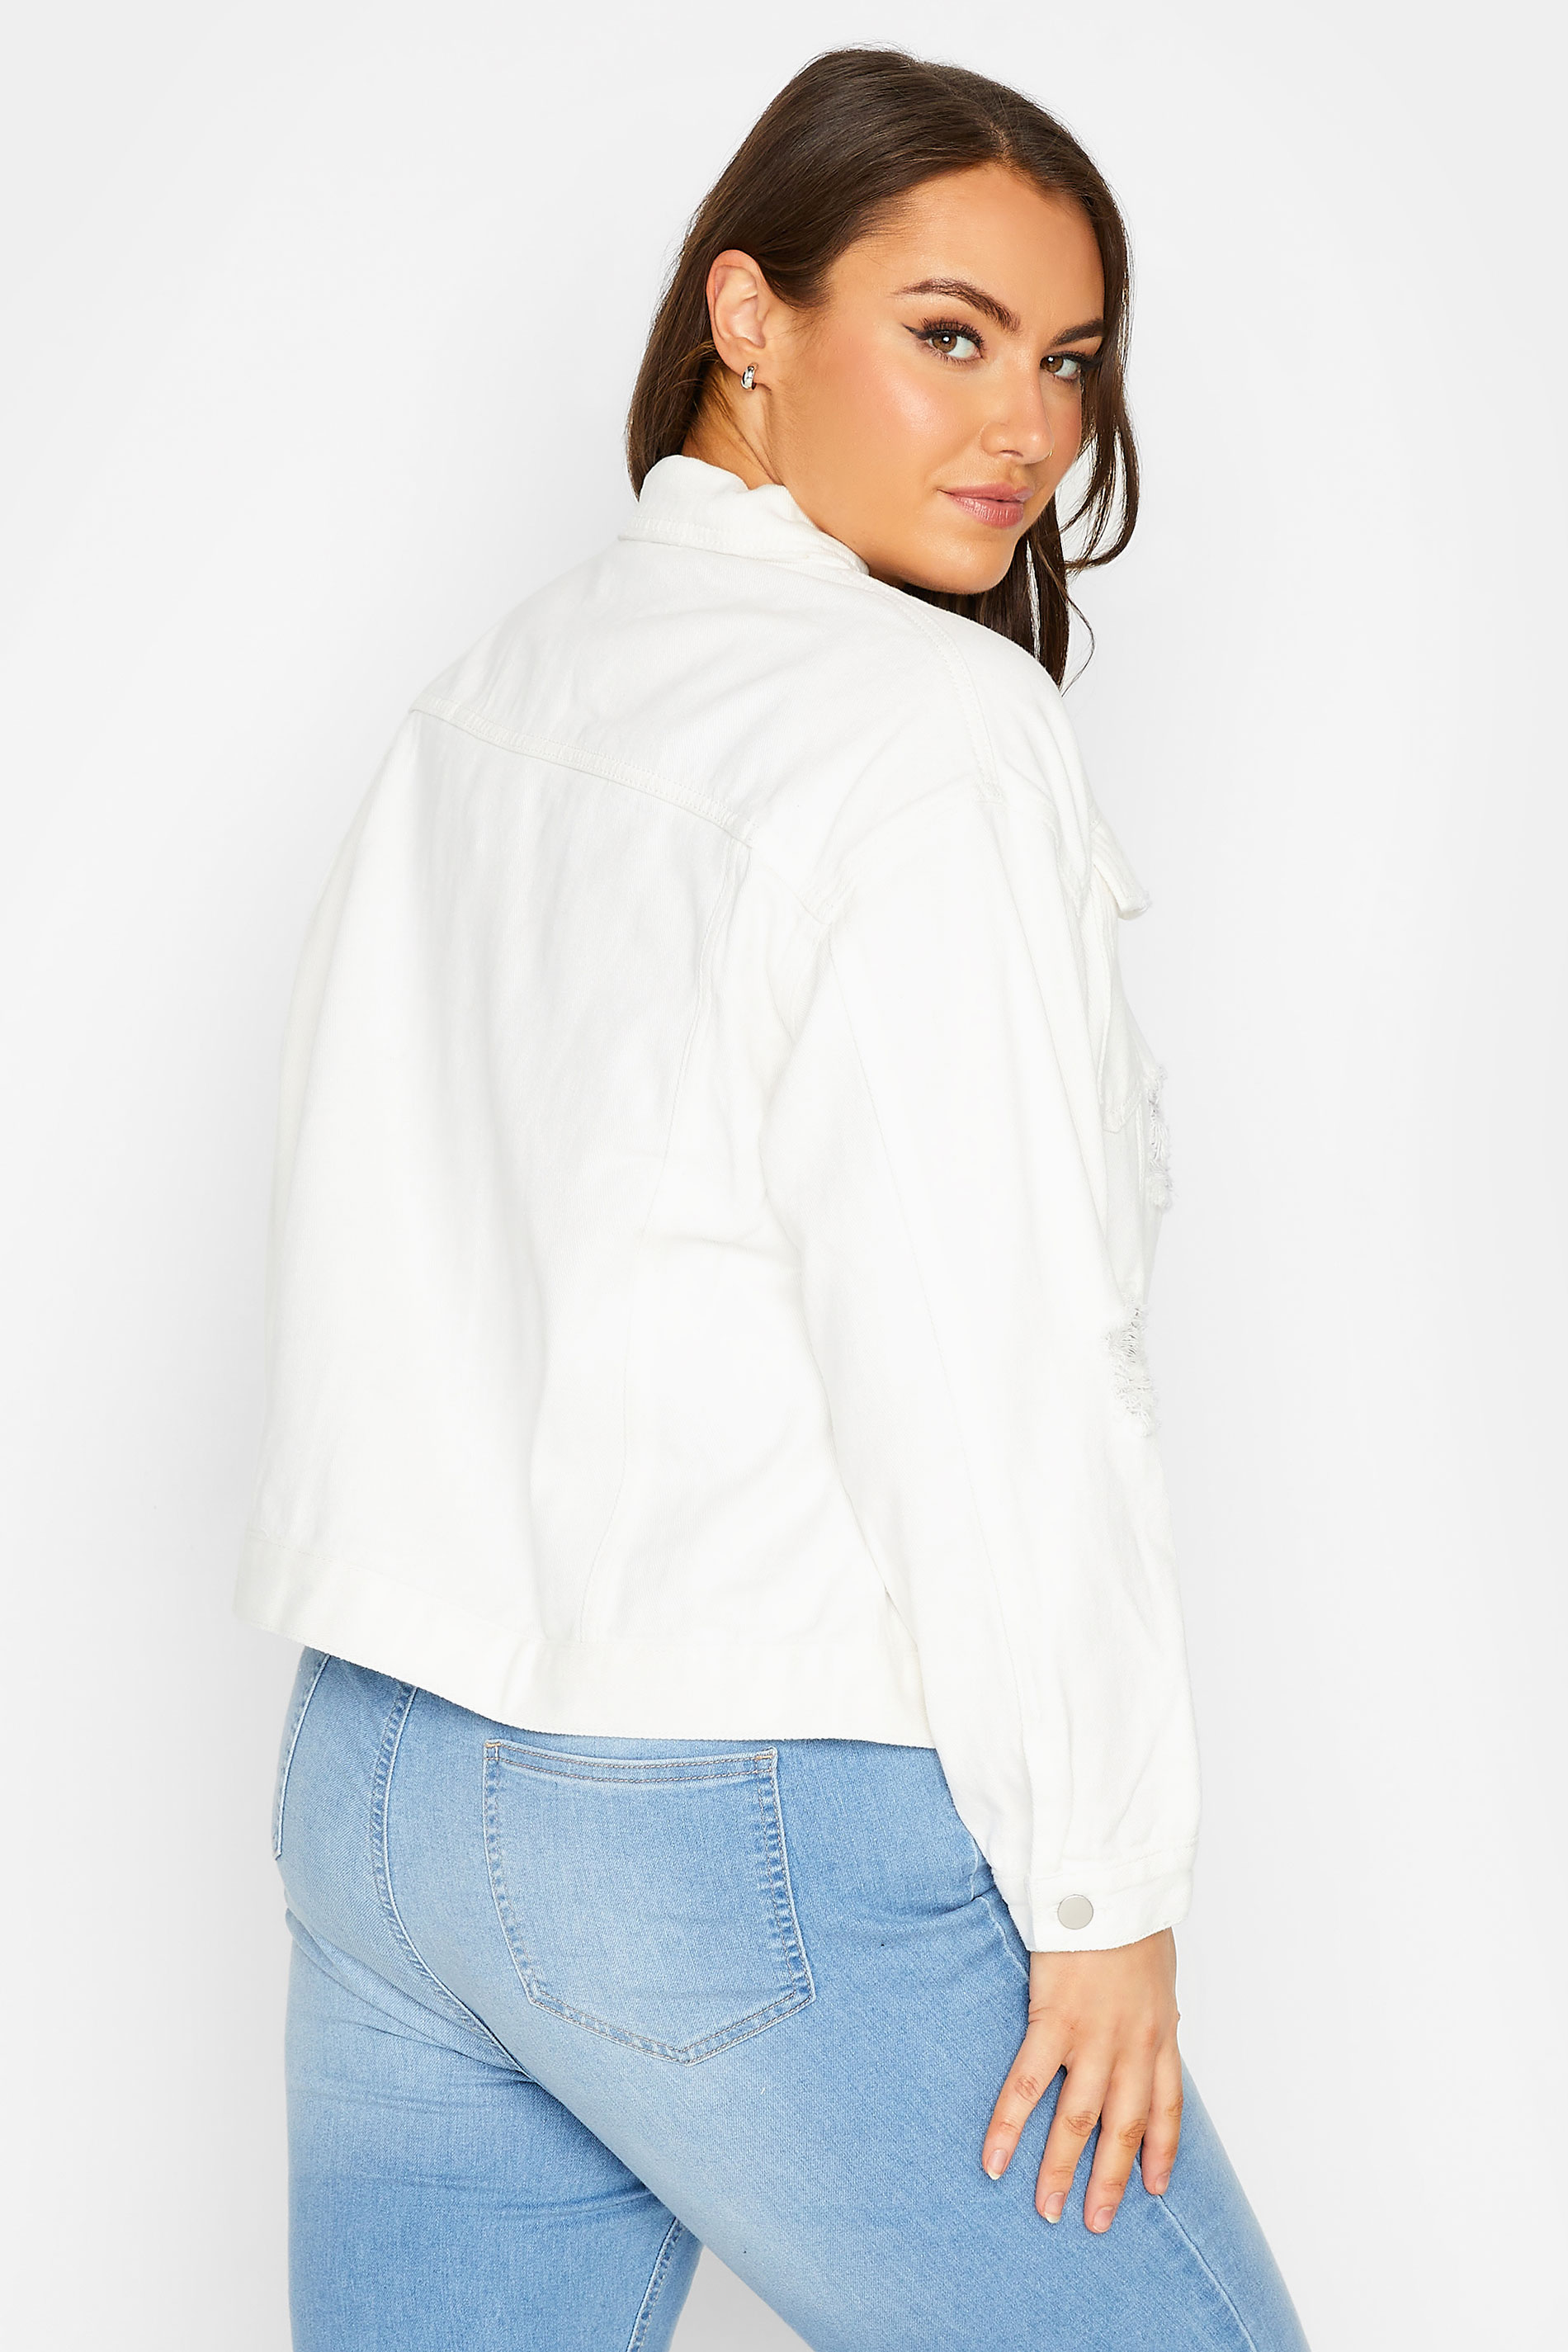 YOURS Curve White Distressed Western Denim Jacket | Yours Clothing  3